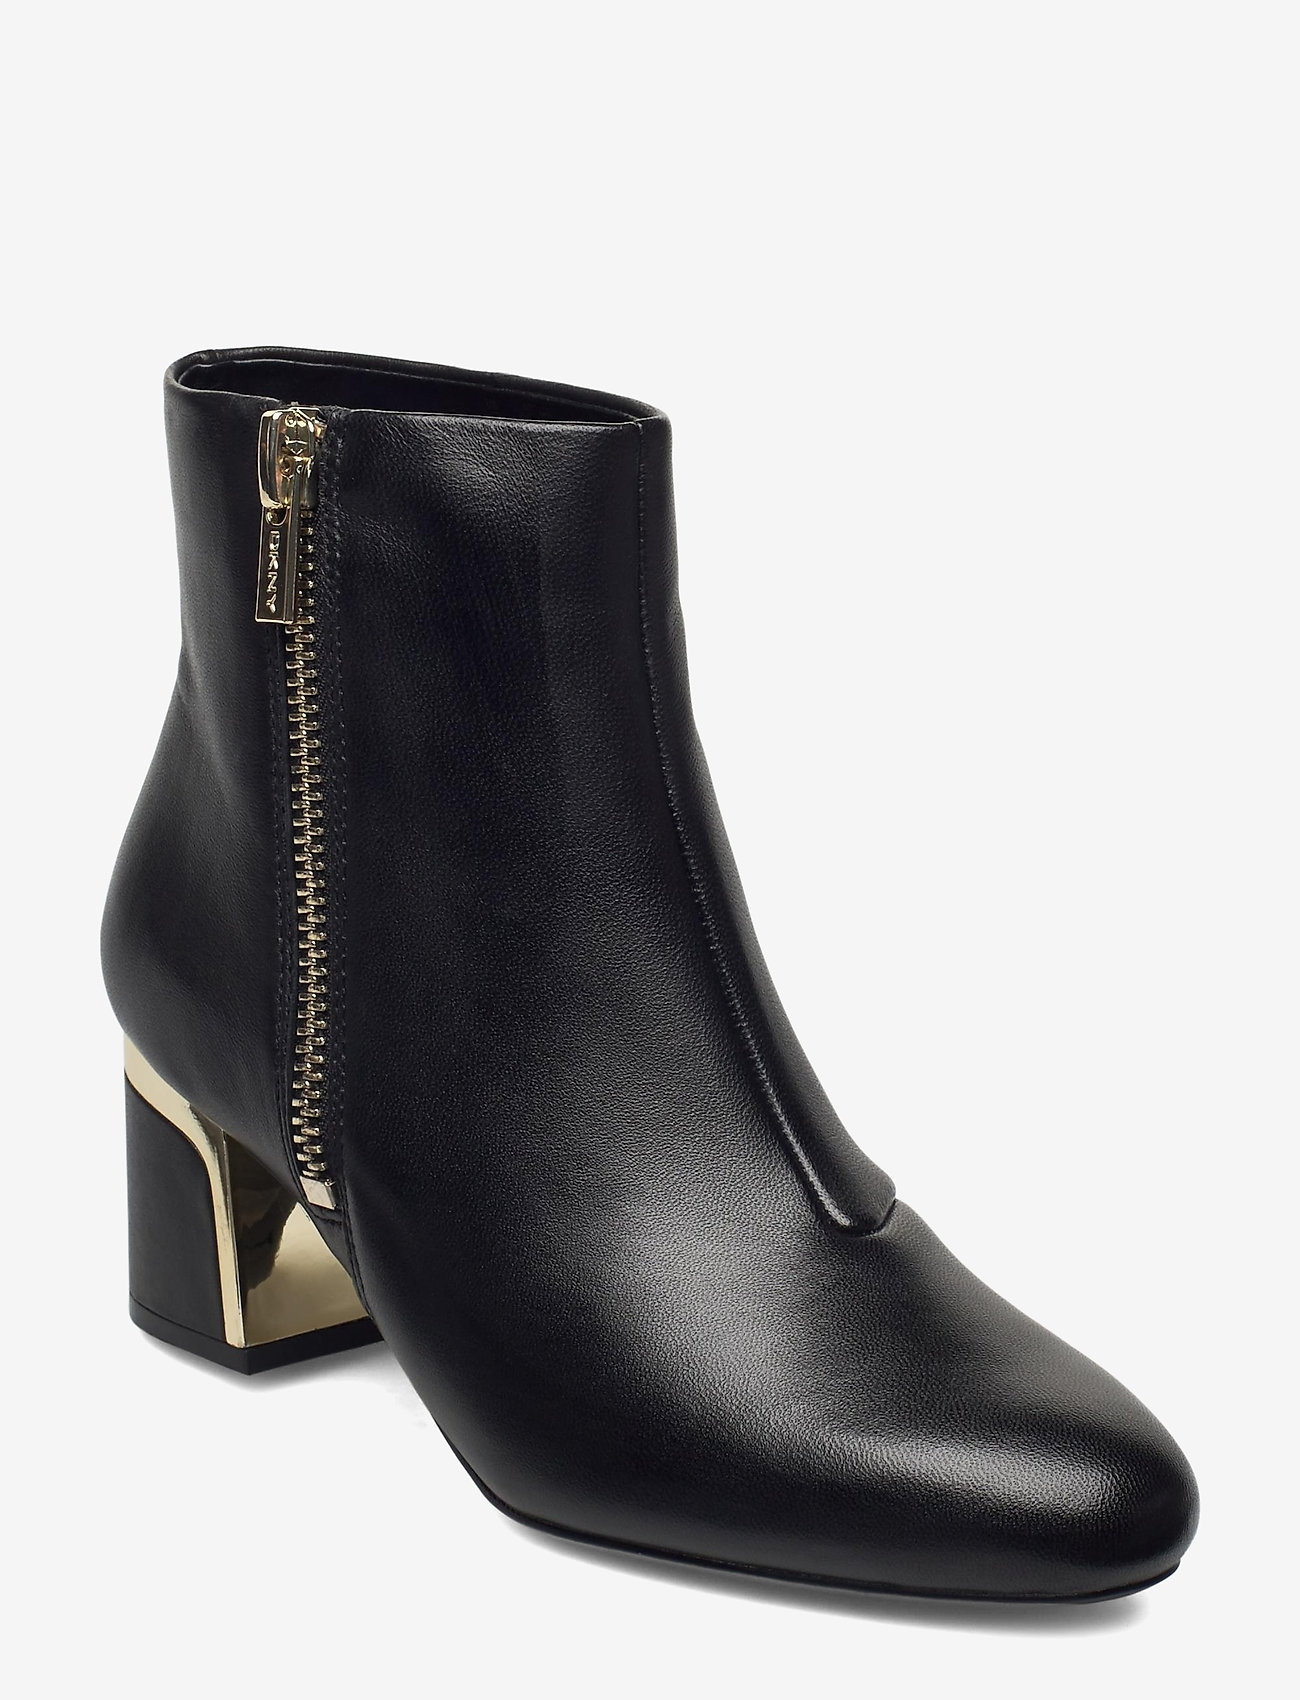 dkny black ankle boots